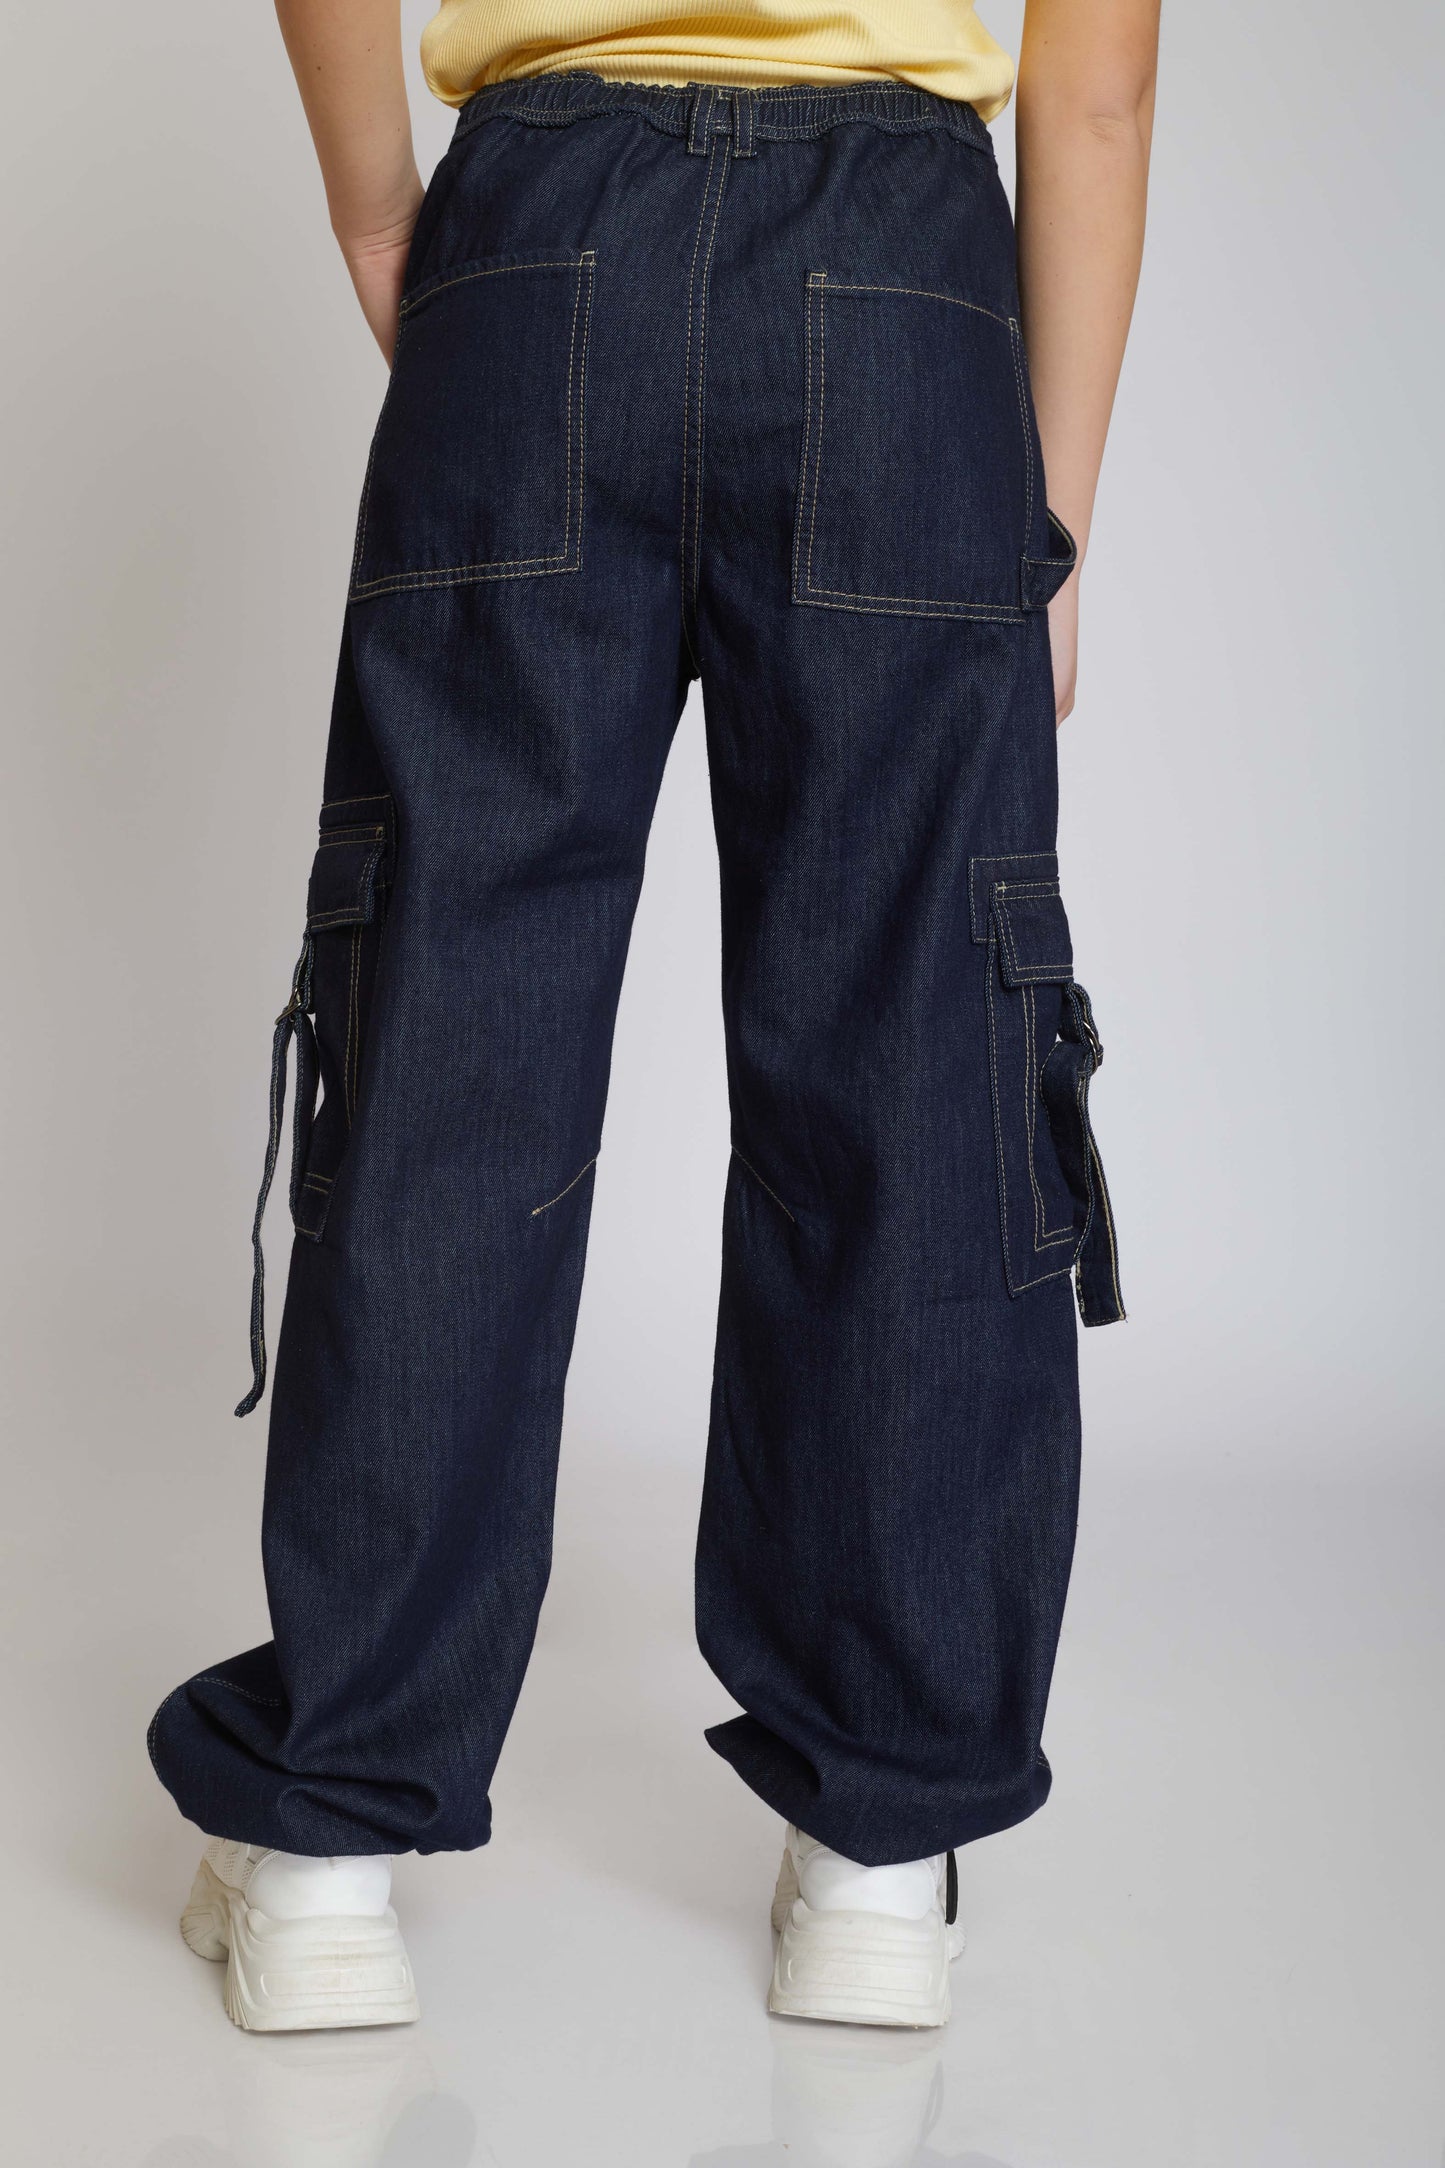 Parachute Jeans Trousers - For Women